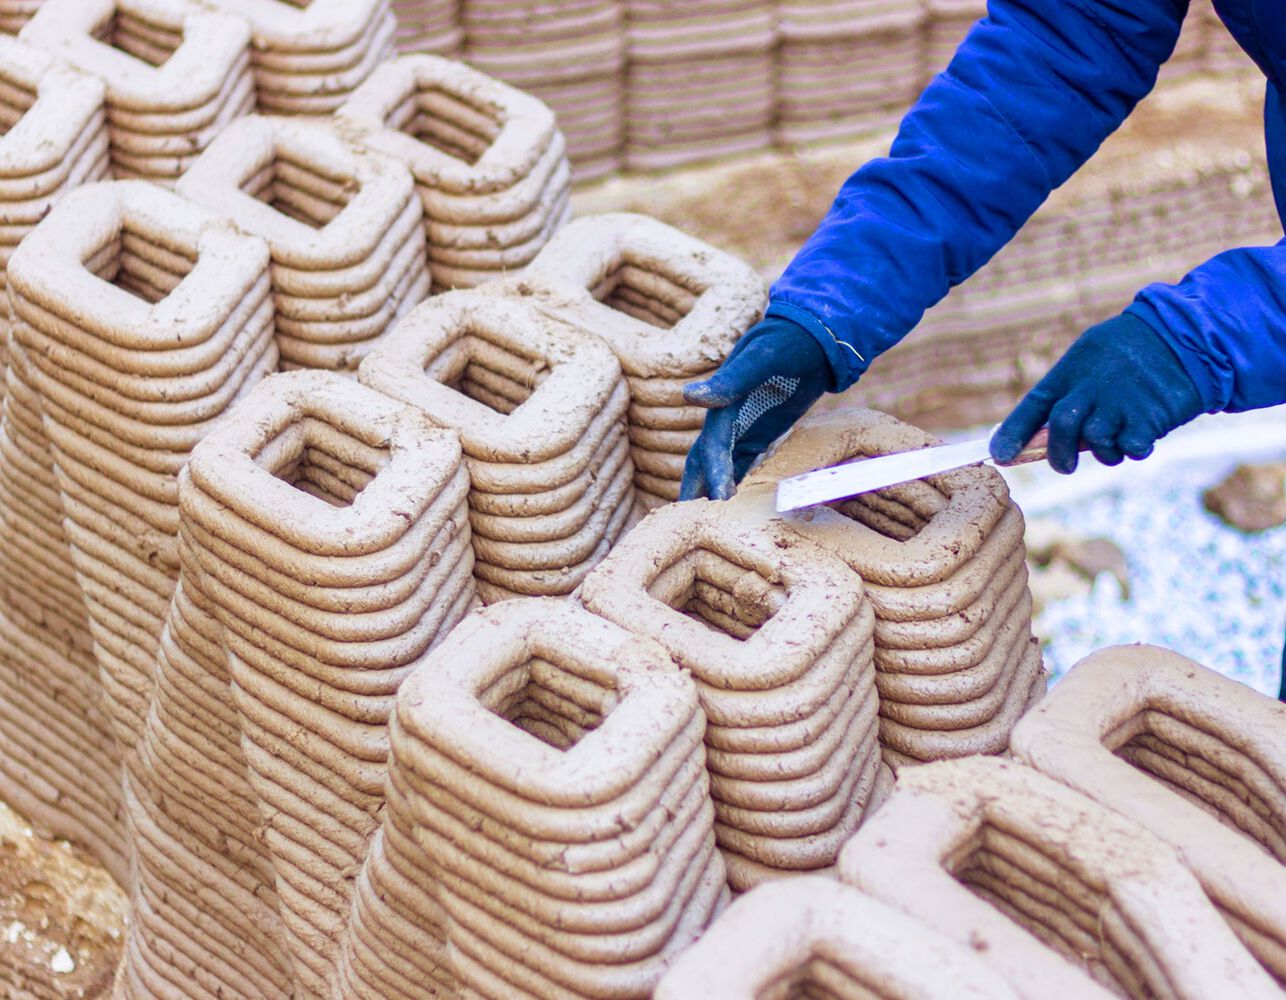 Spain’s first architectural structure constructed of earth and 3D printers